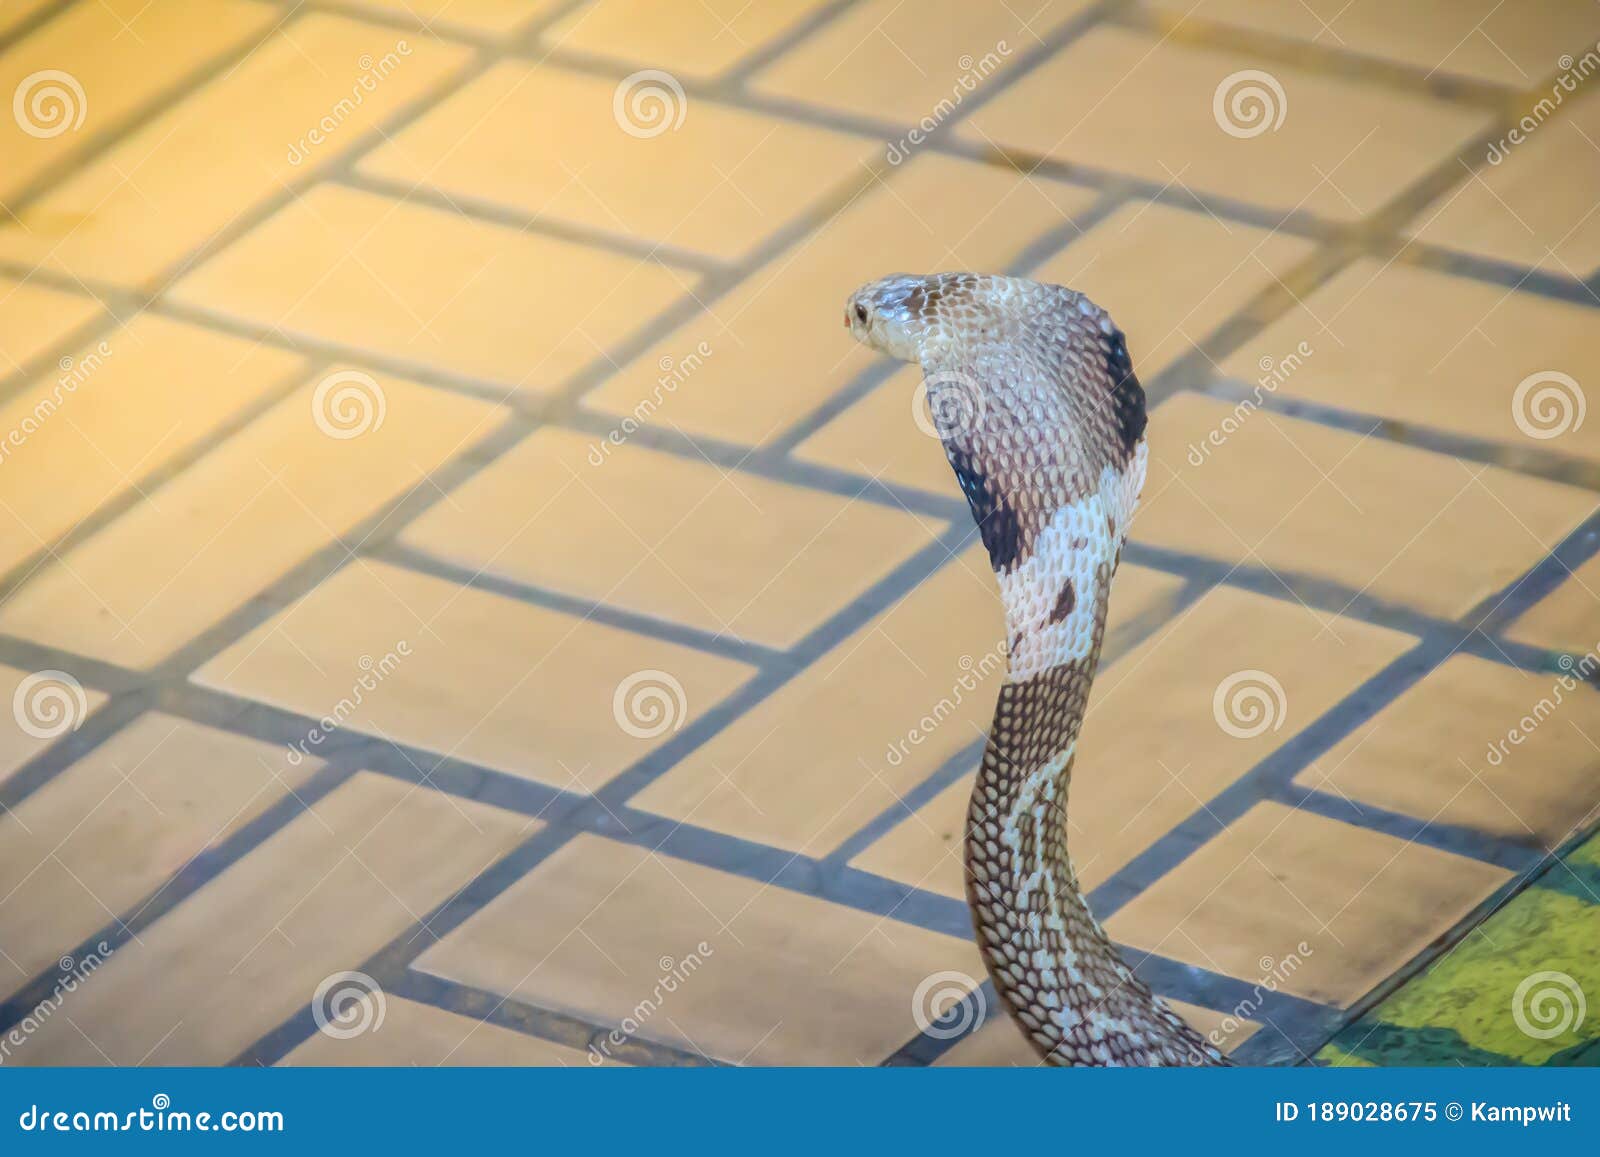 a cobra hooding and growling on the floor. the monocled cobra (naja kaouthia), also called monocellate cobra, is a deadly venomous